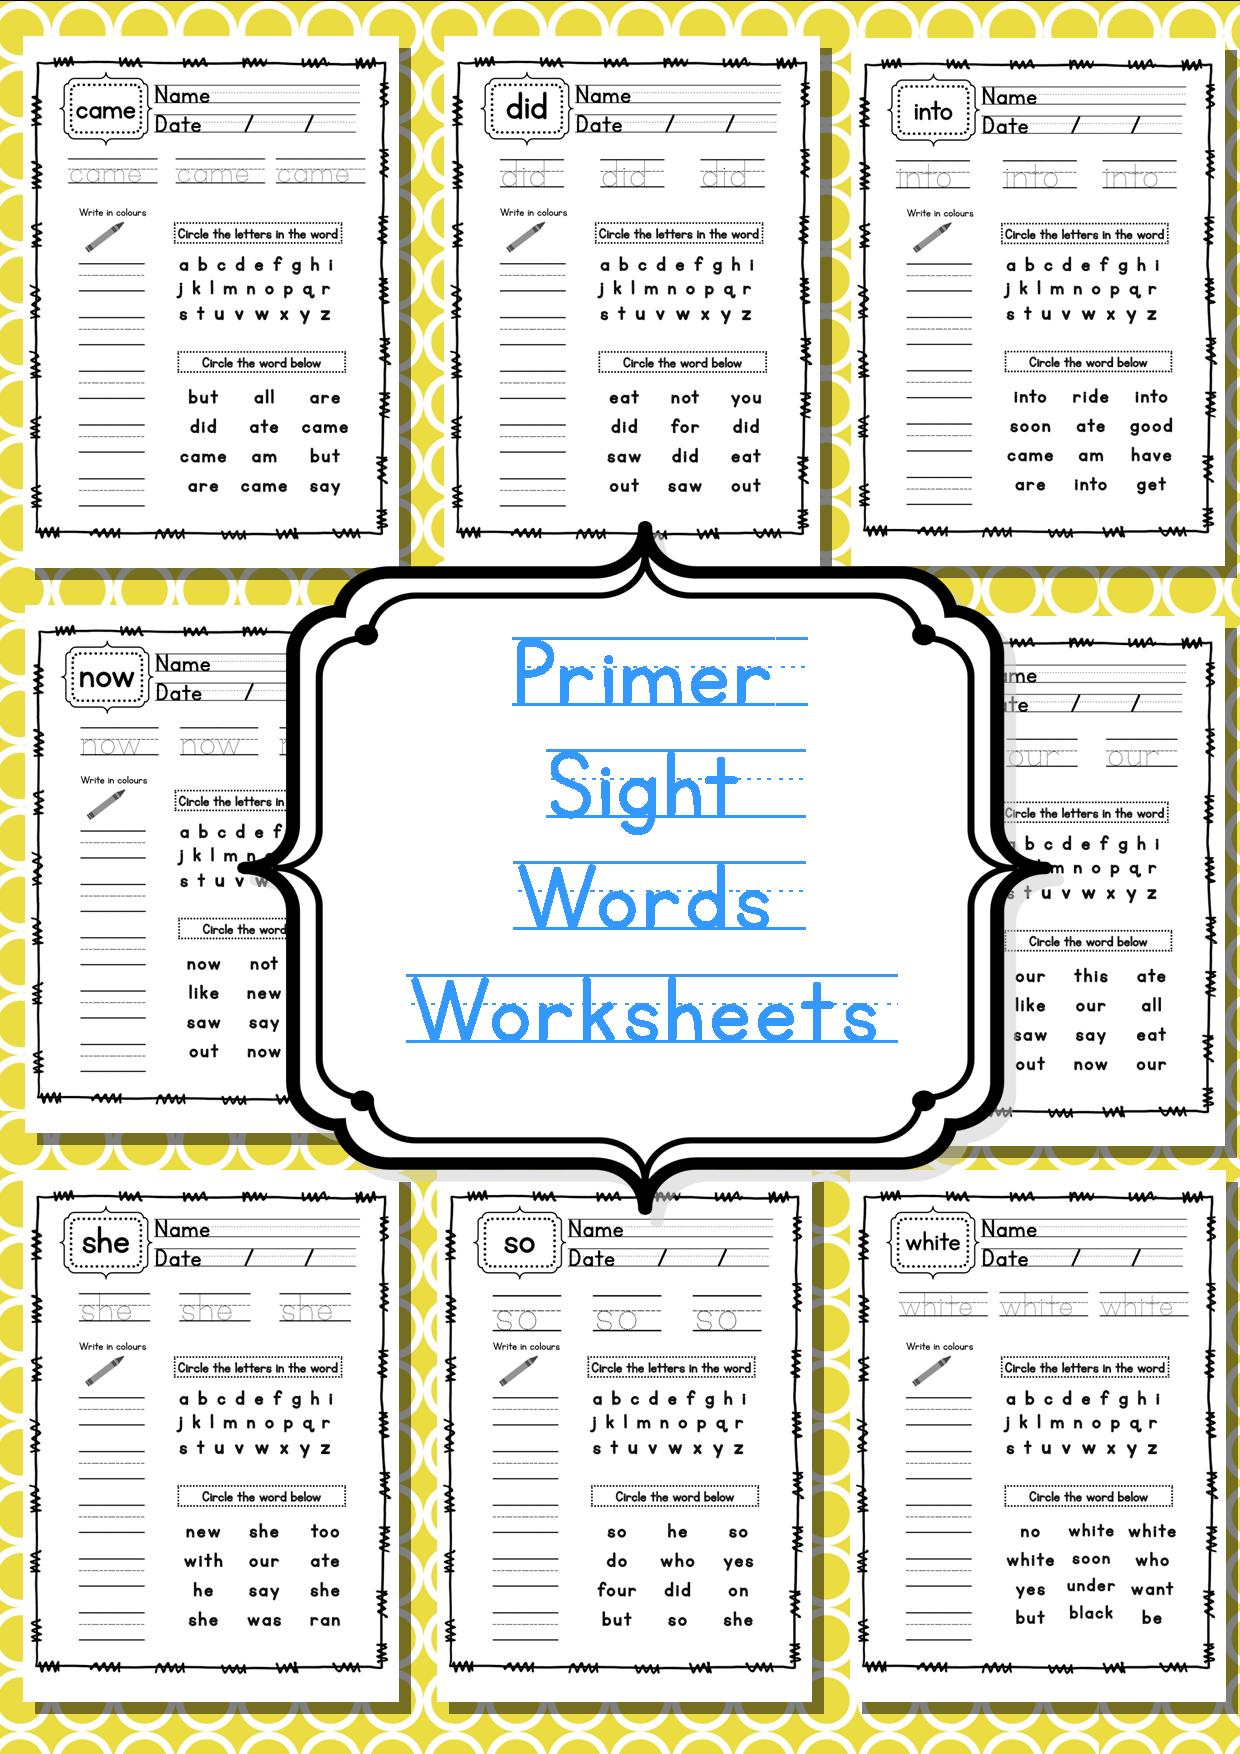 sight word worksheets. Here 52 primer is worksheets a  sight  word  pdf set includes of this The all